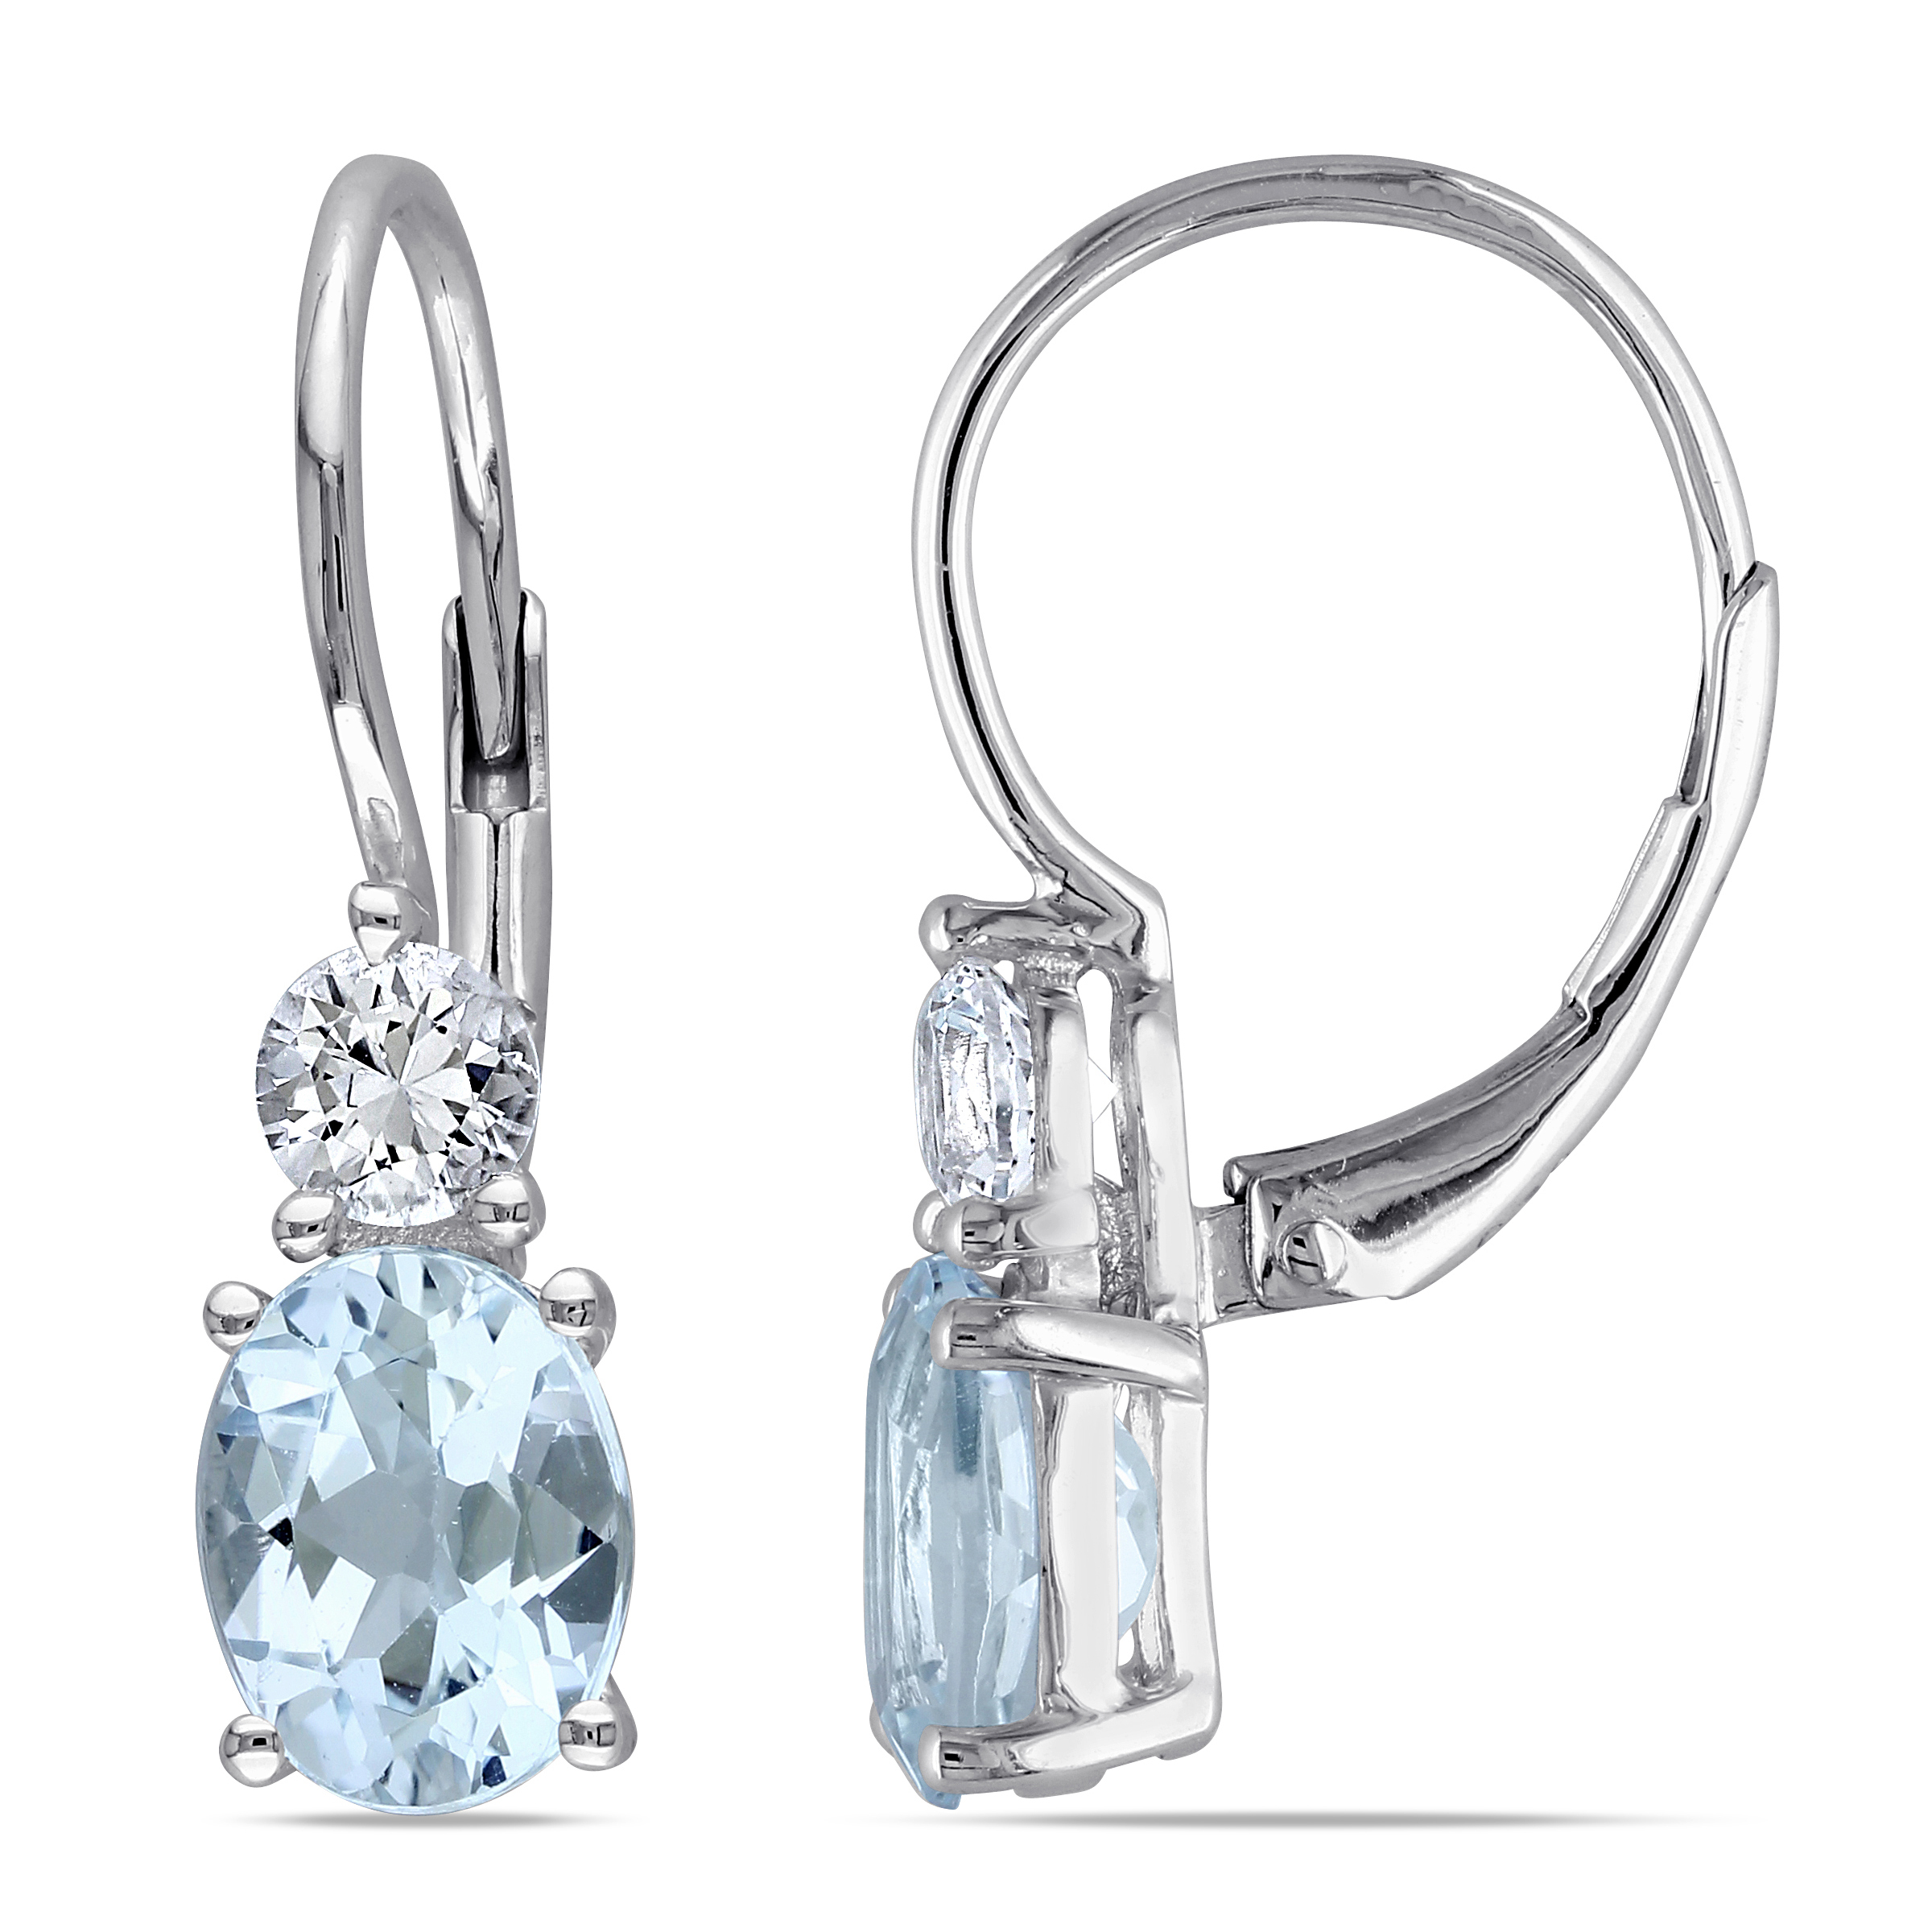 3 4/5 CT TGW Blue Topaz and Created White Sapphire Leverback Earrings in Sterling Silver